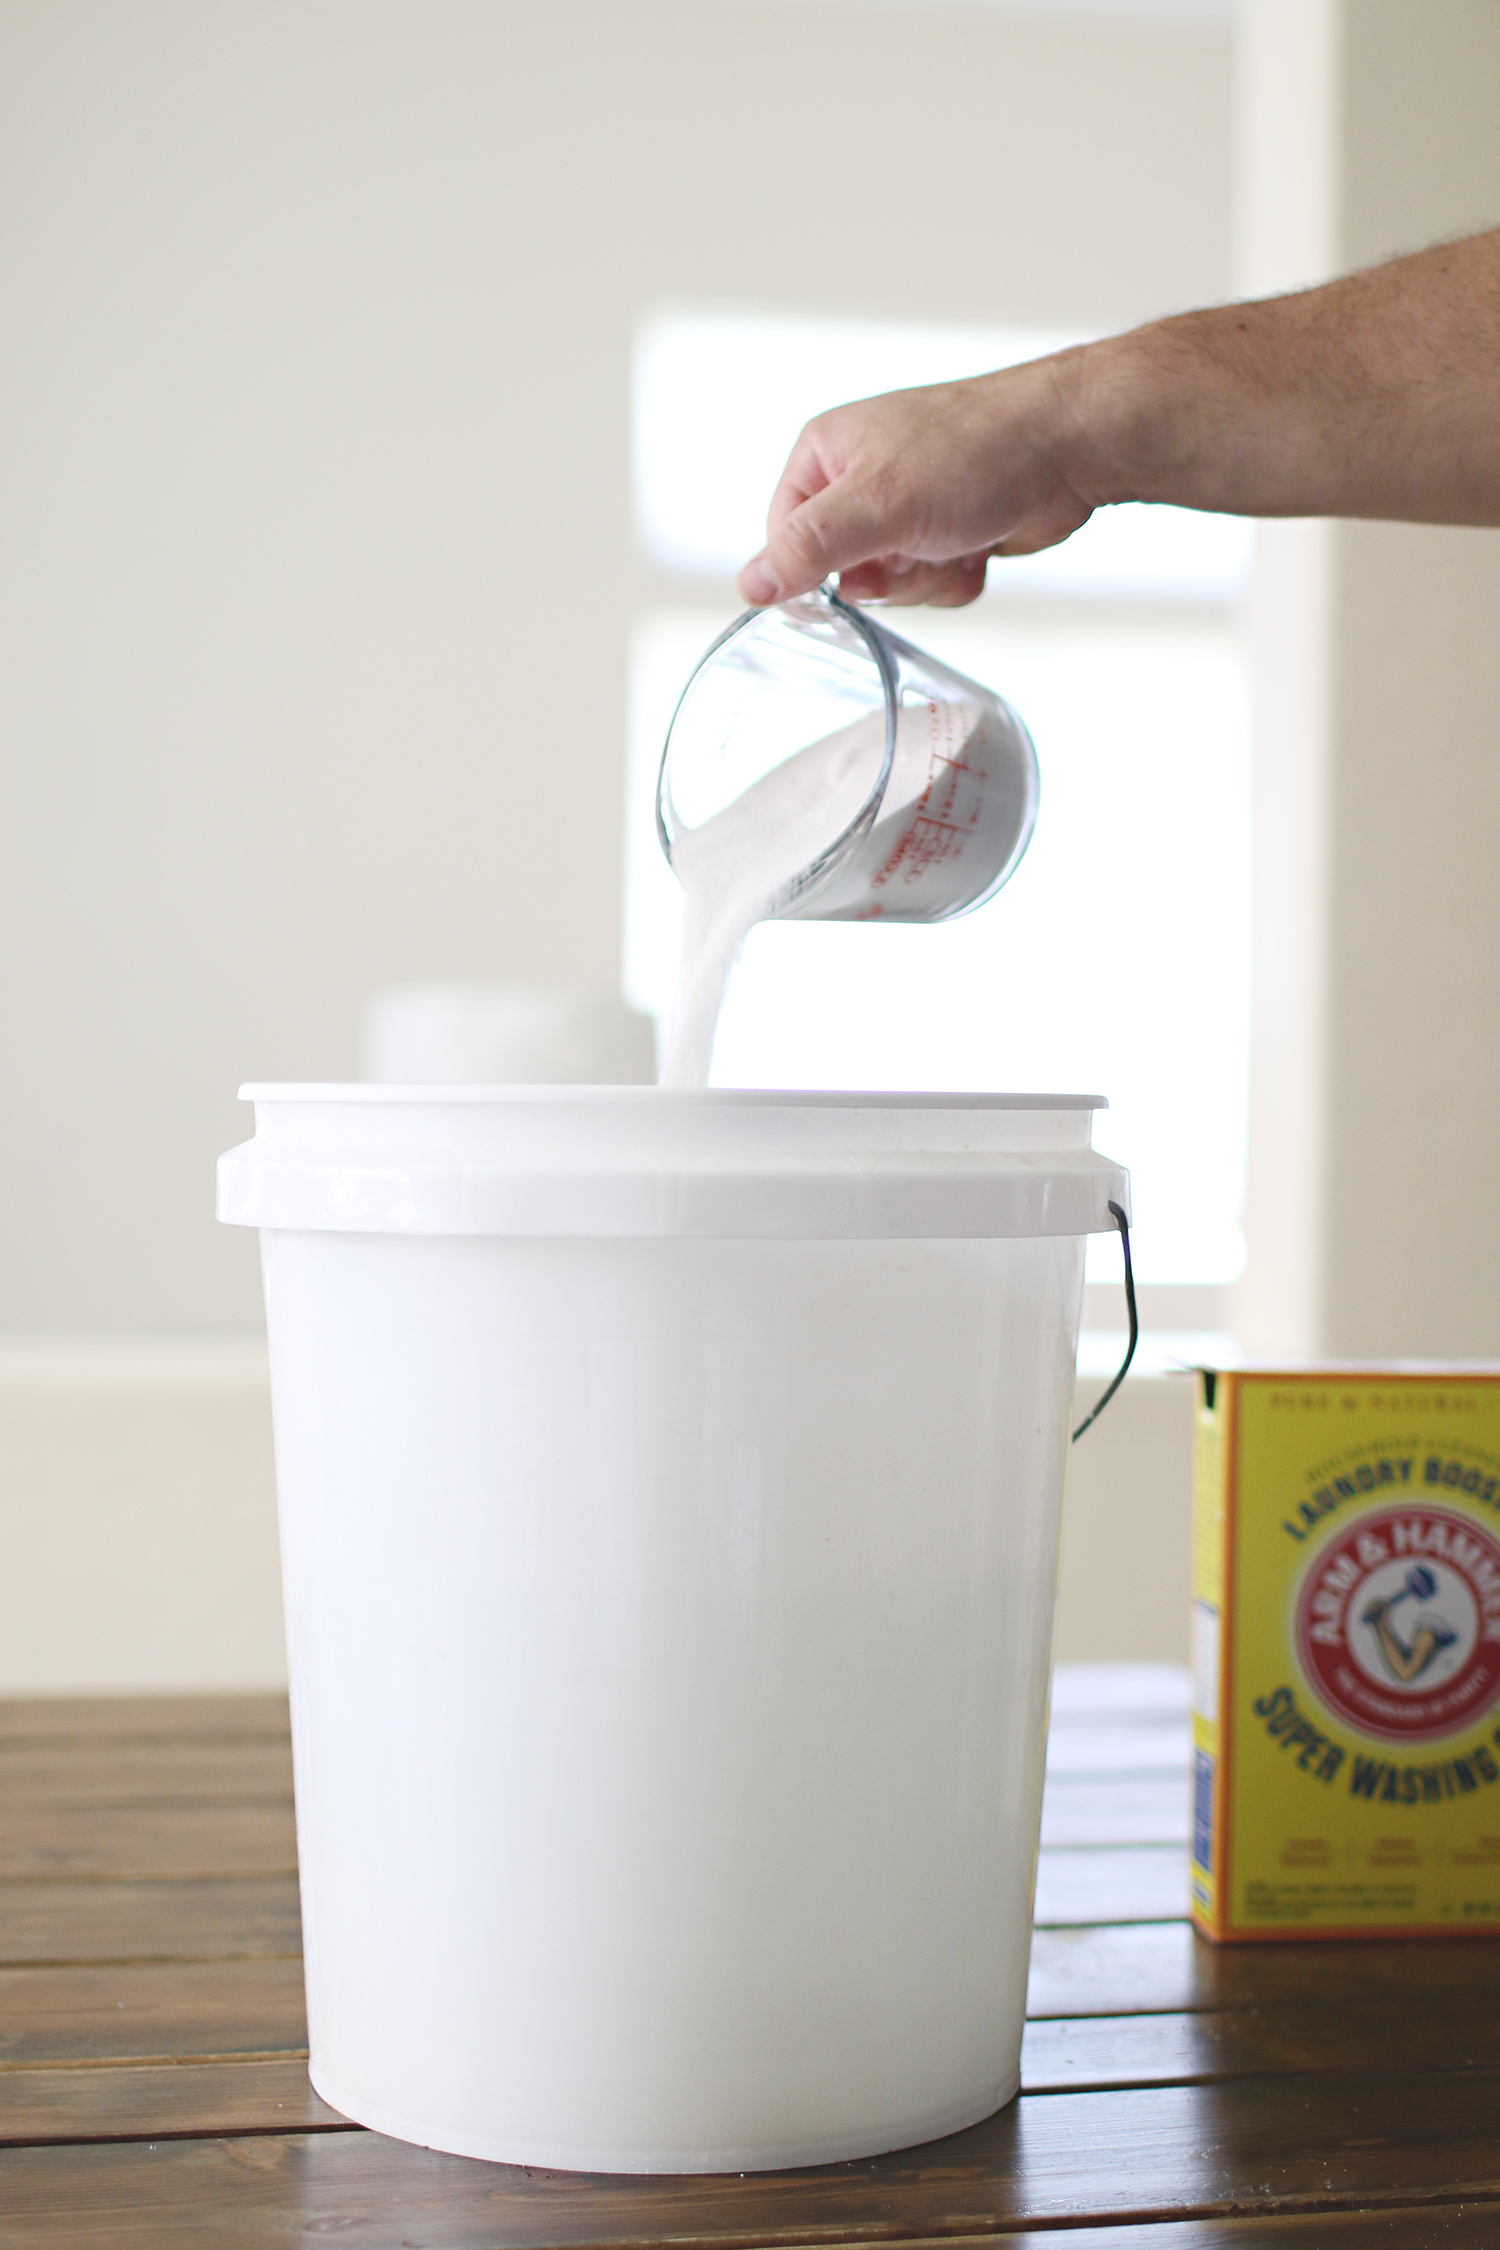 DIY laundry detergent and how to save big on it | HausOfLayne.com #DIY #DIYLaundrySoap #HouseAndHome #FrugalLiving 